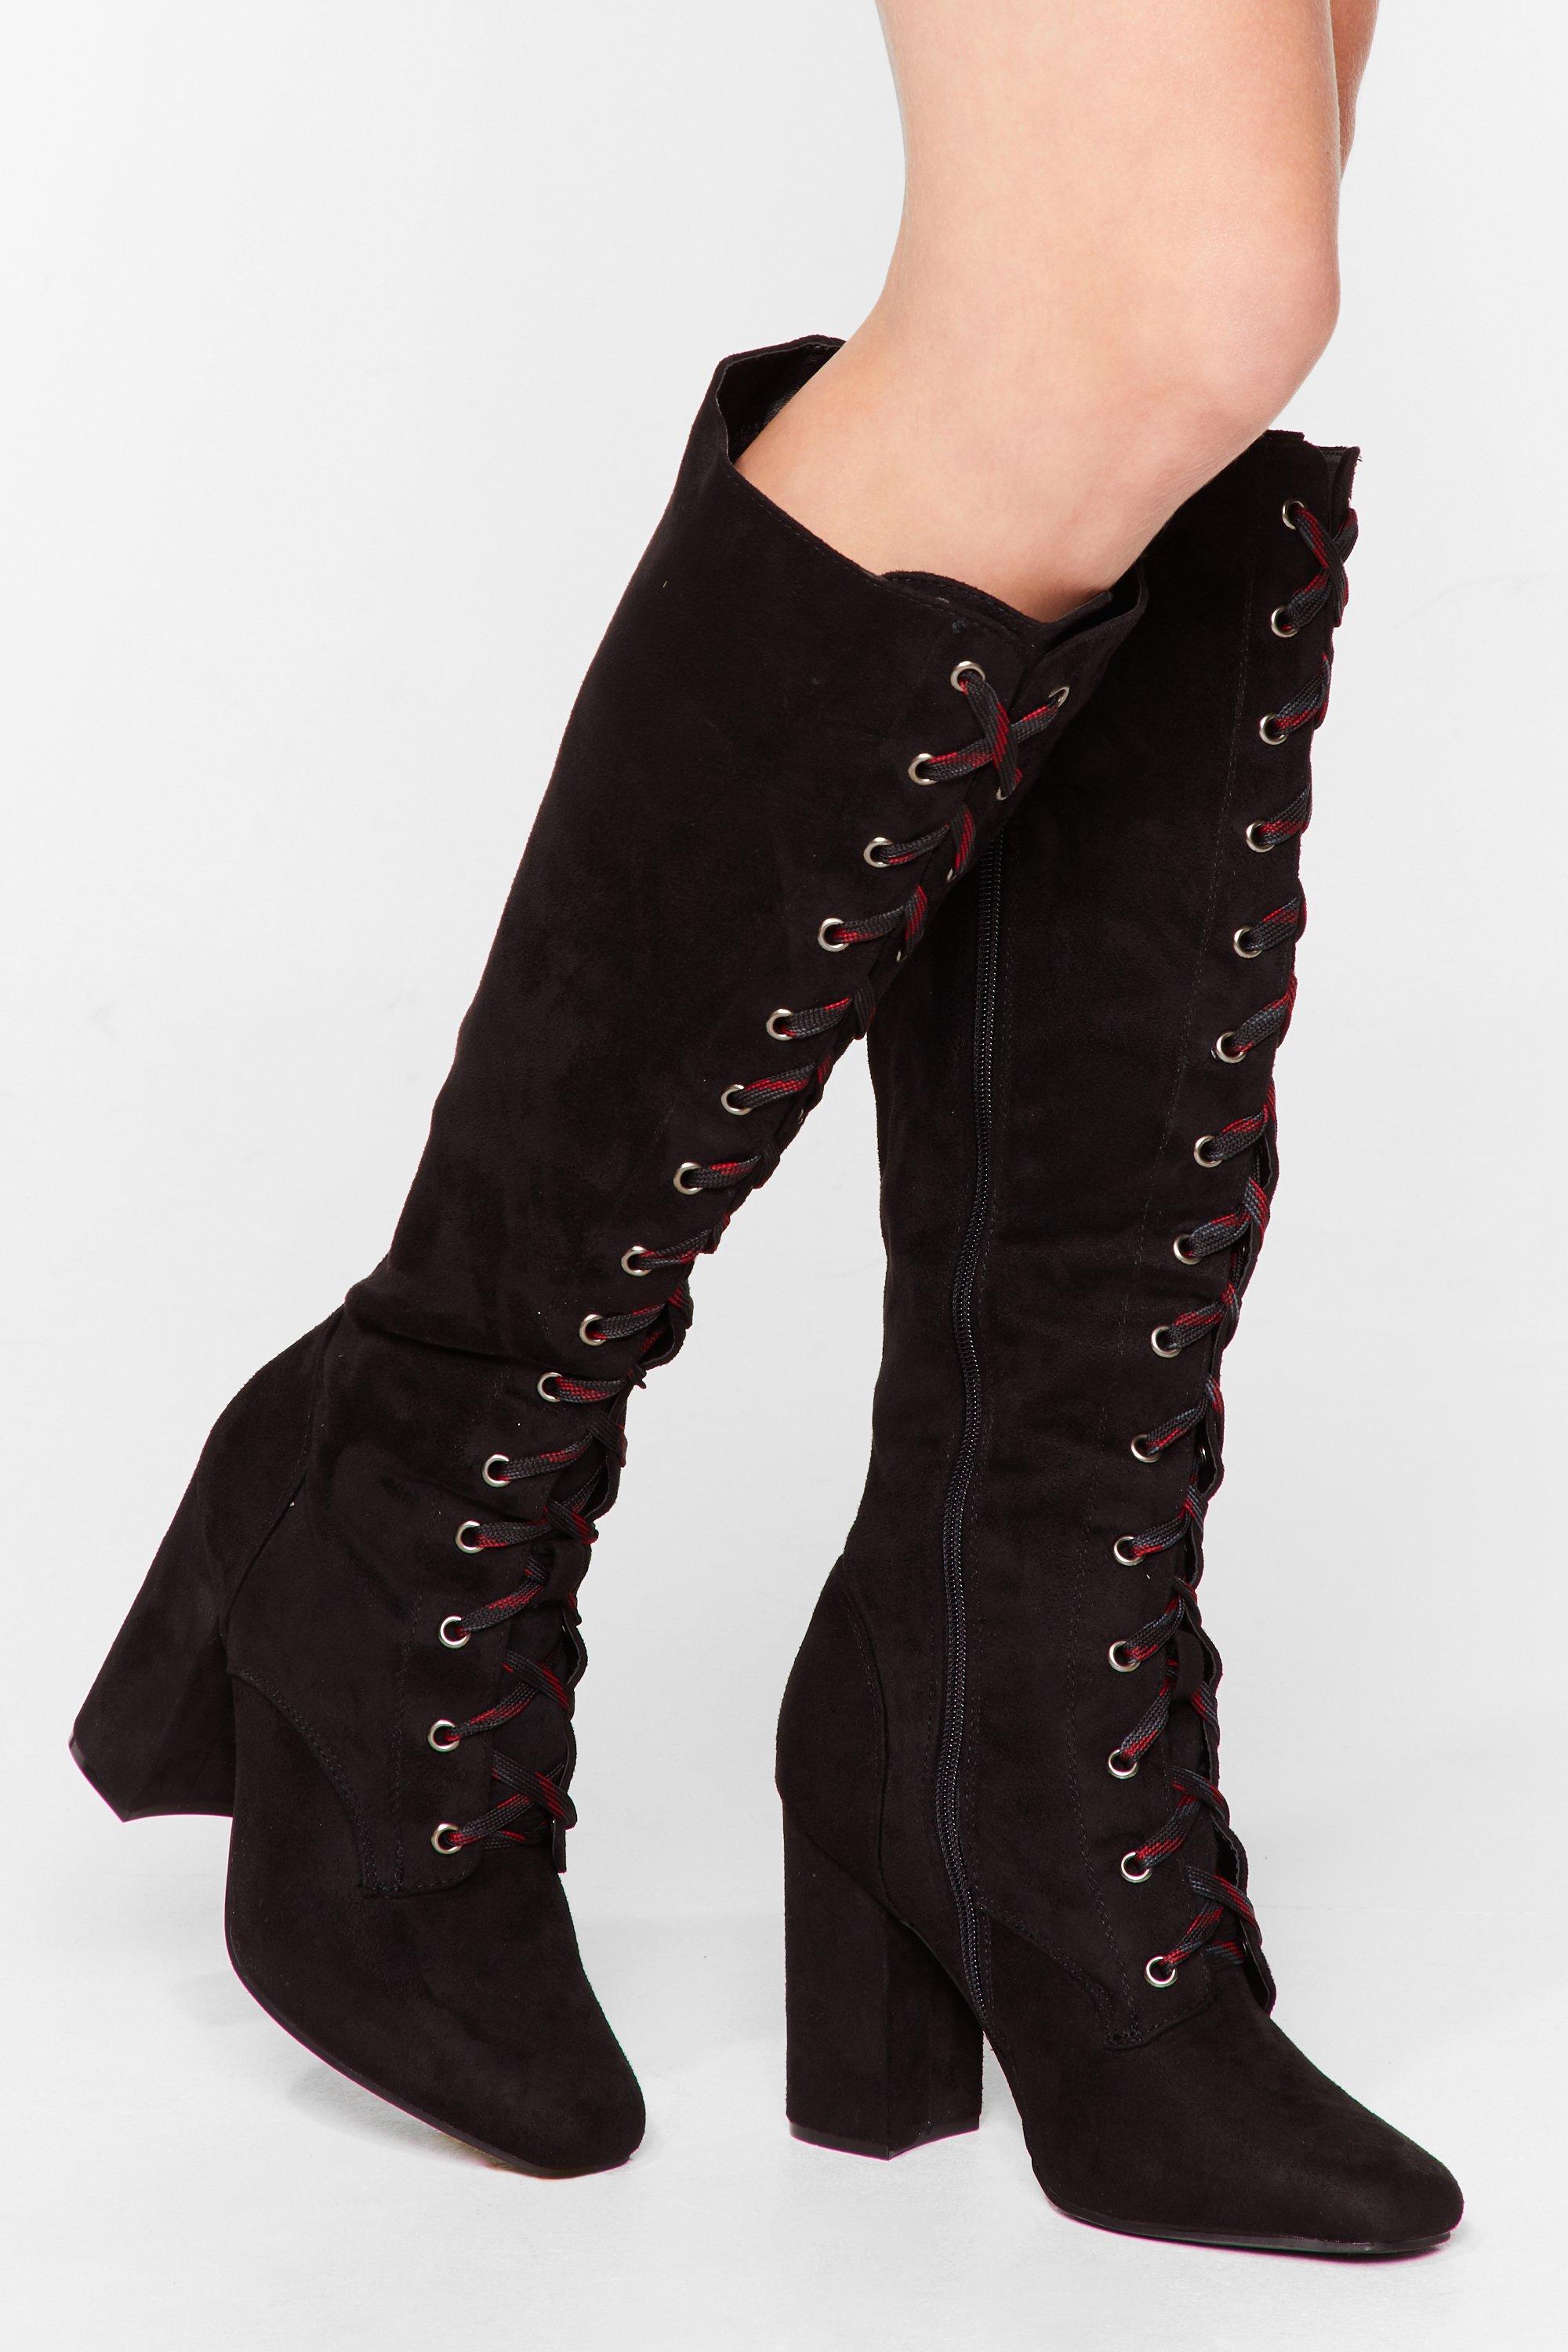 lace up knee high heels